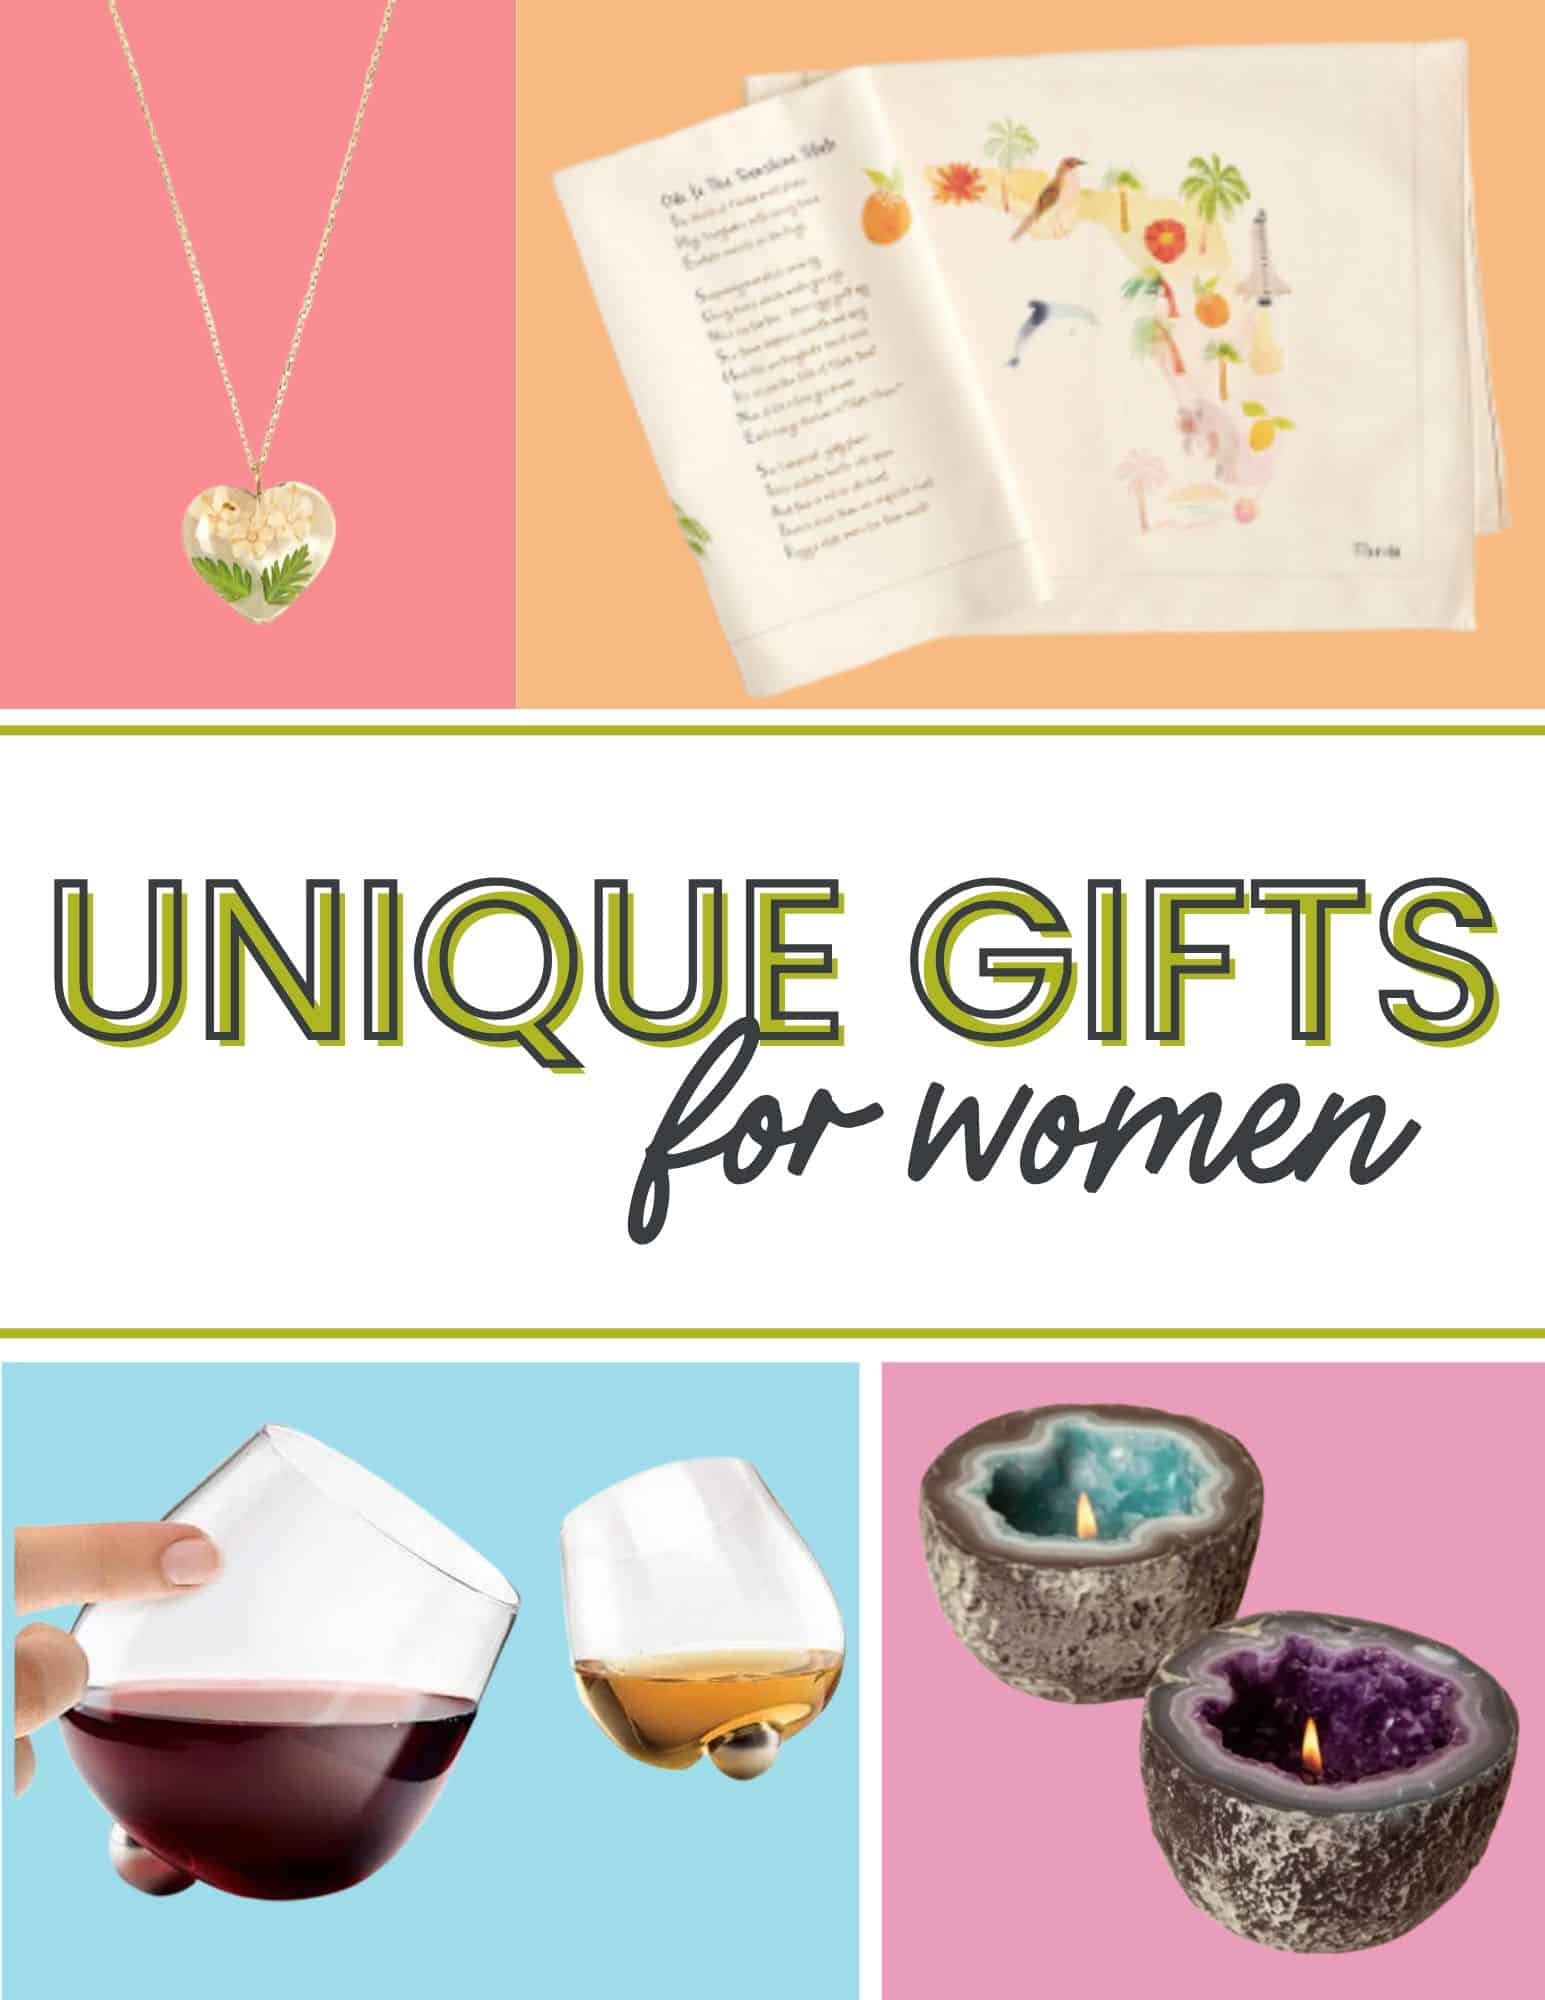 Unique and Thoughtful Gift Ideas for Women